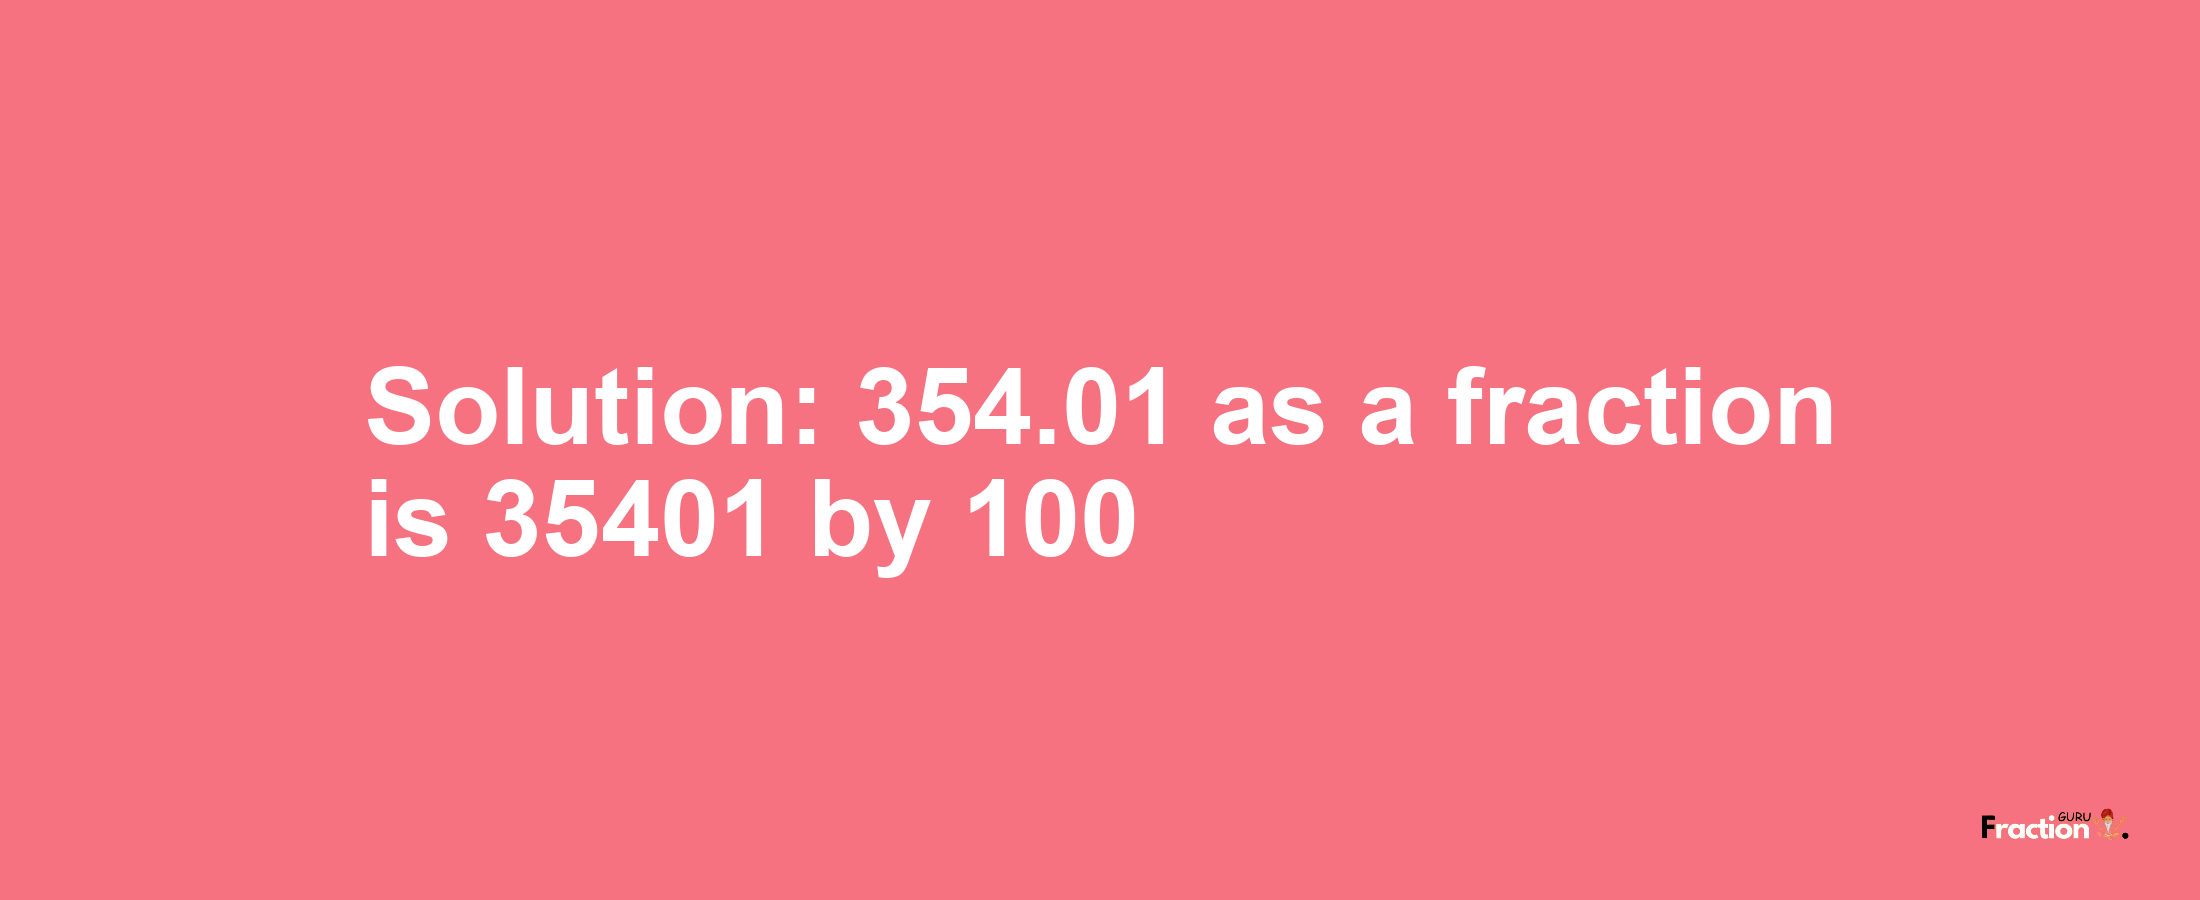 Solution:354.01 as a fraction is 35401/100